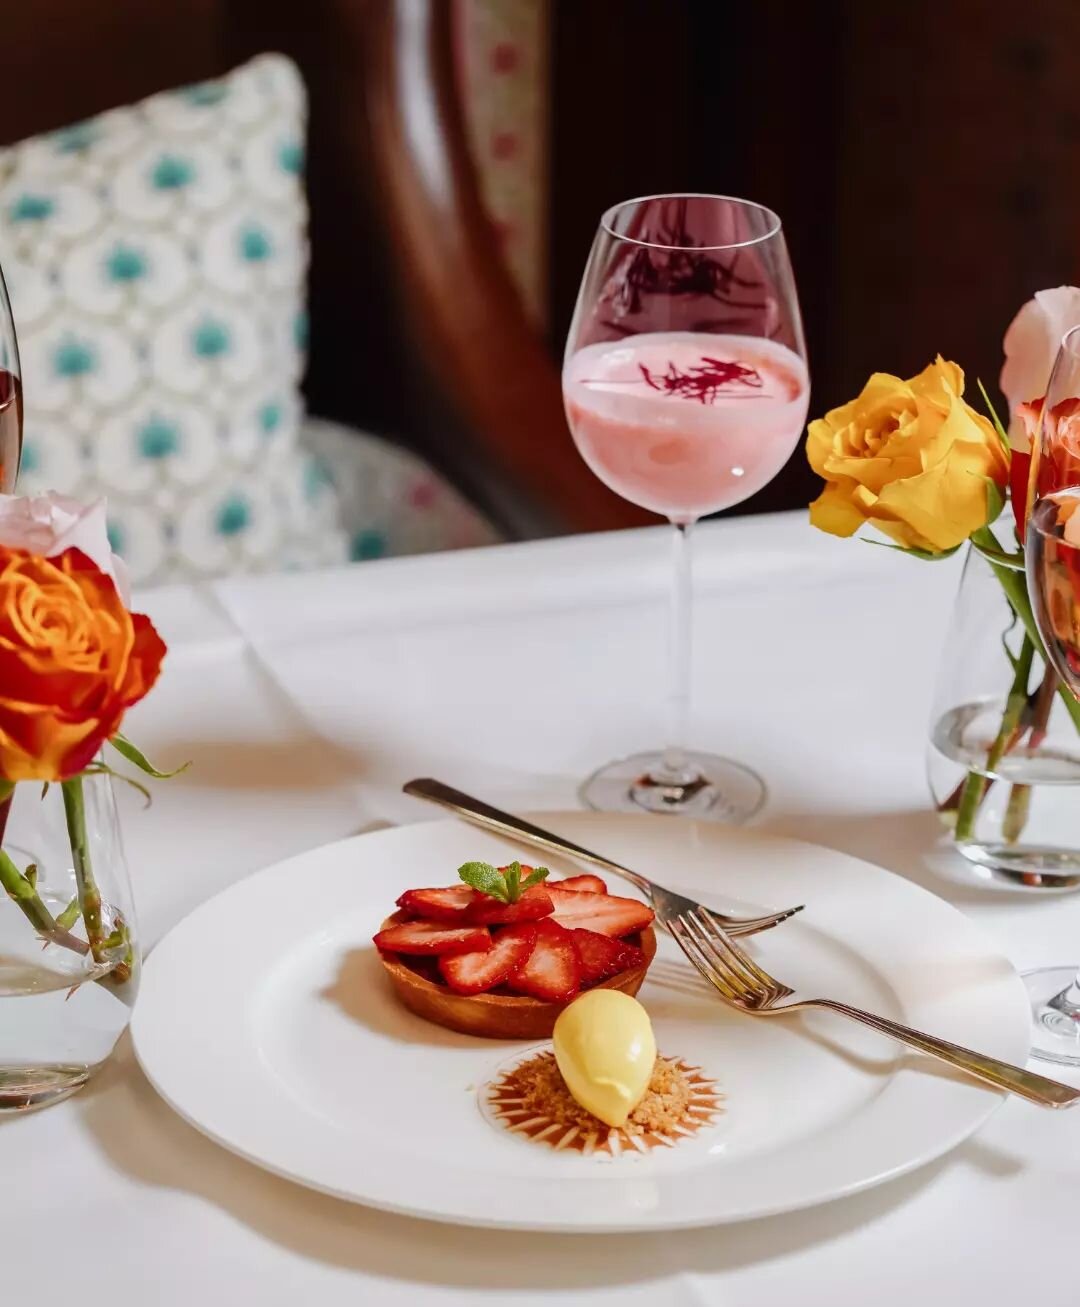 If Valentine's Day has somehow slipped your mind, we've got you sorted: a chic dinner date at India Club 🌹 last minute tables available via phone or mail.